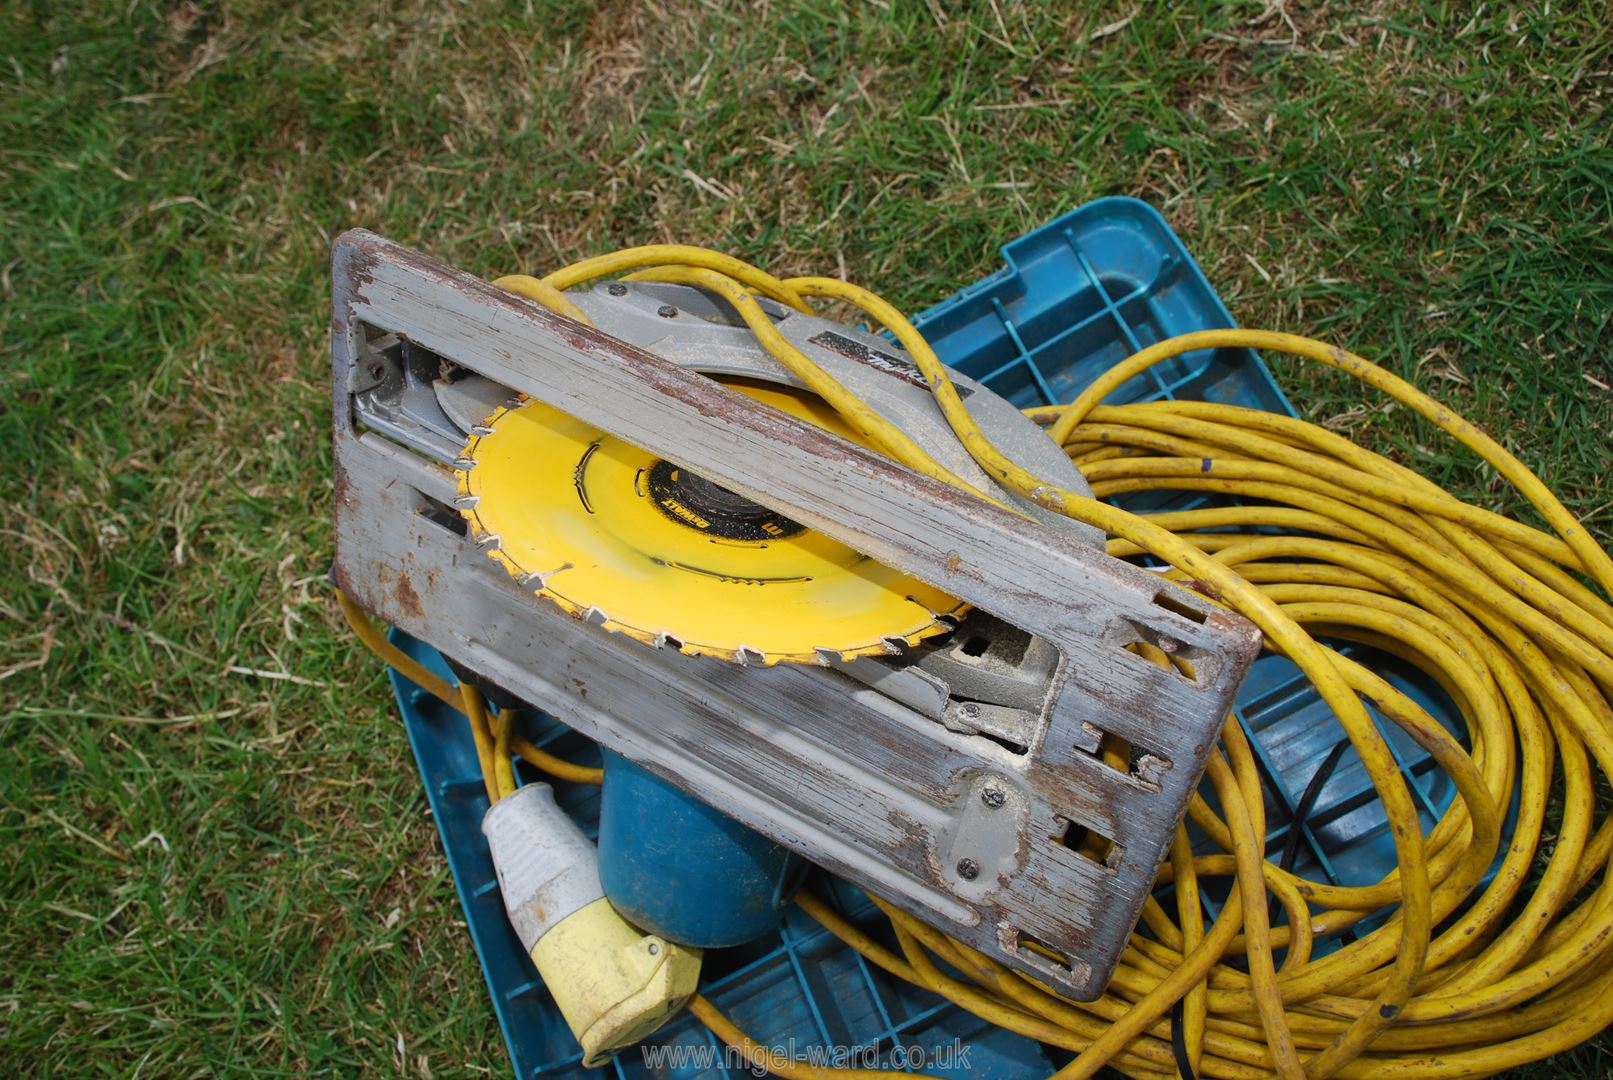 A Makita Ripsaw with extension lead and DeWalt Nail Gun, (no battery). - Image 2 of 3